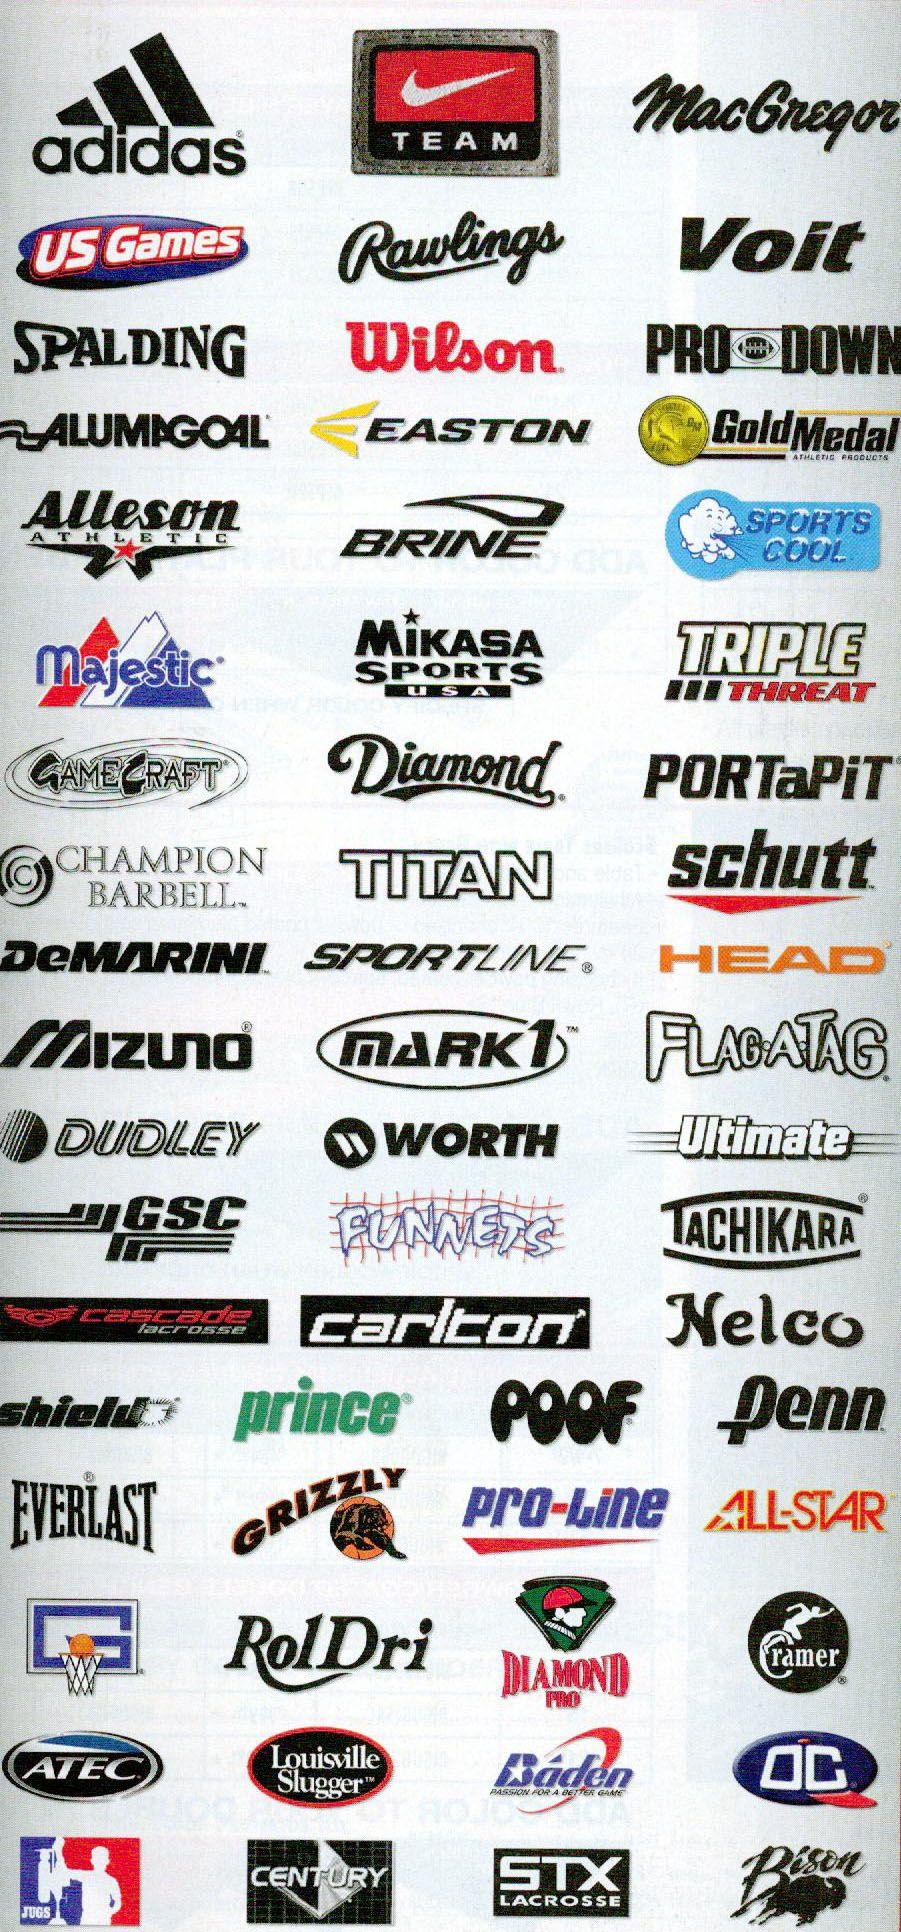 Sports Equipment Logo - Pictures of Sports Company Logos - kidskunst.info